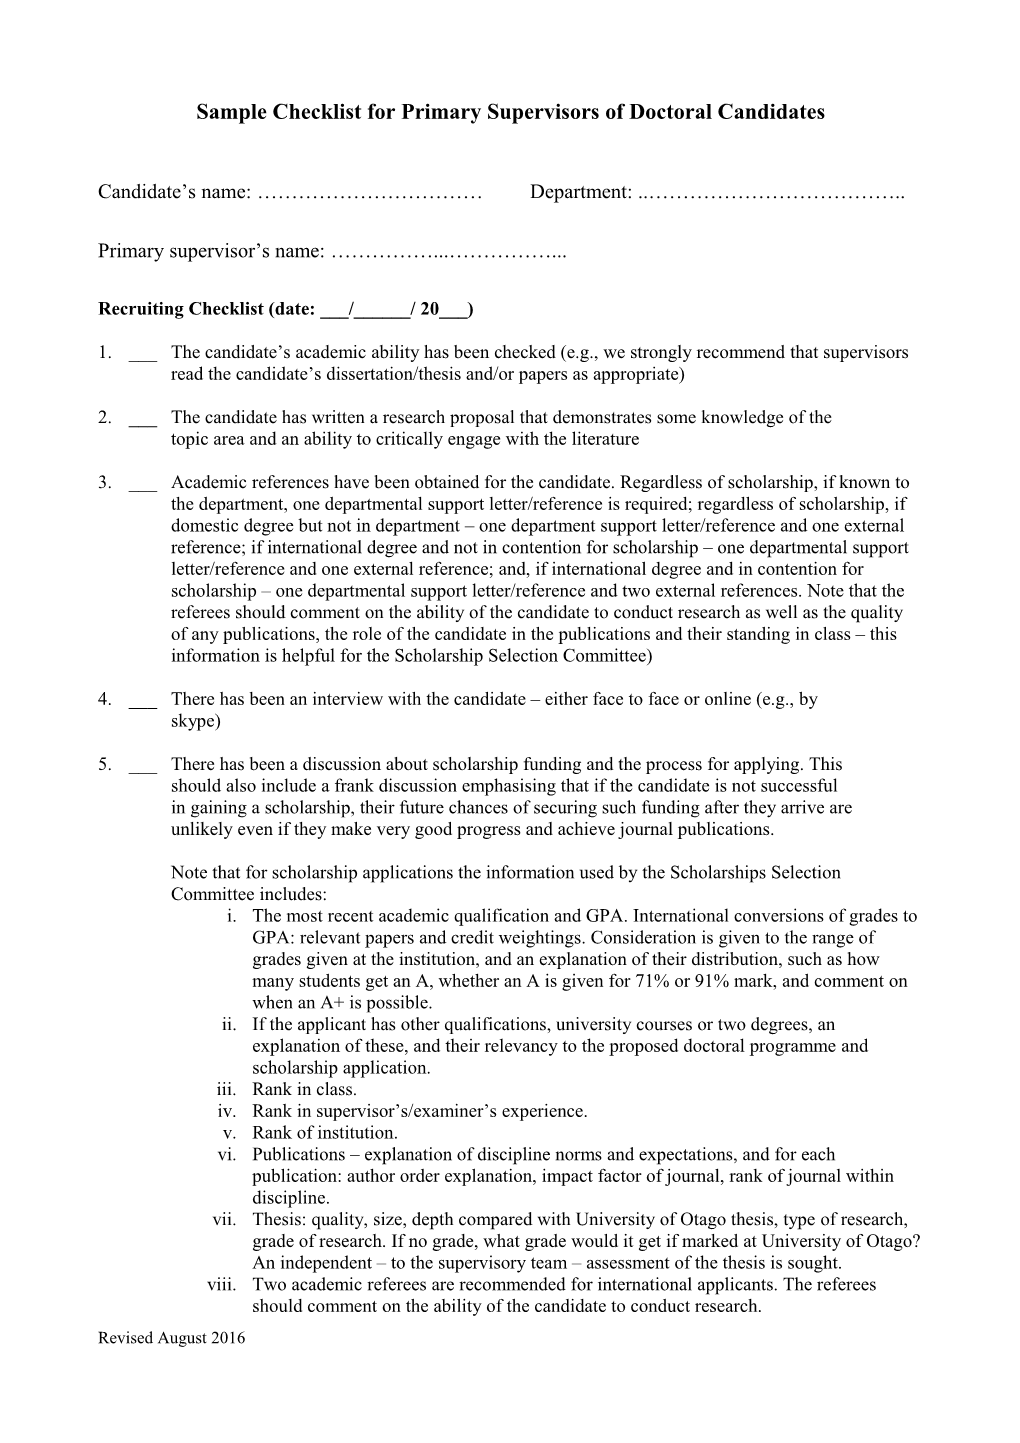 Checklist for Masters Students Required to Submit a Thesis